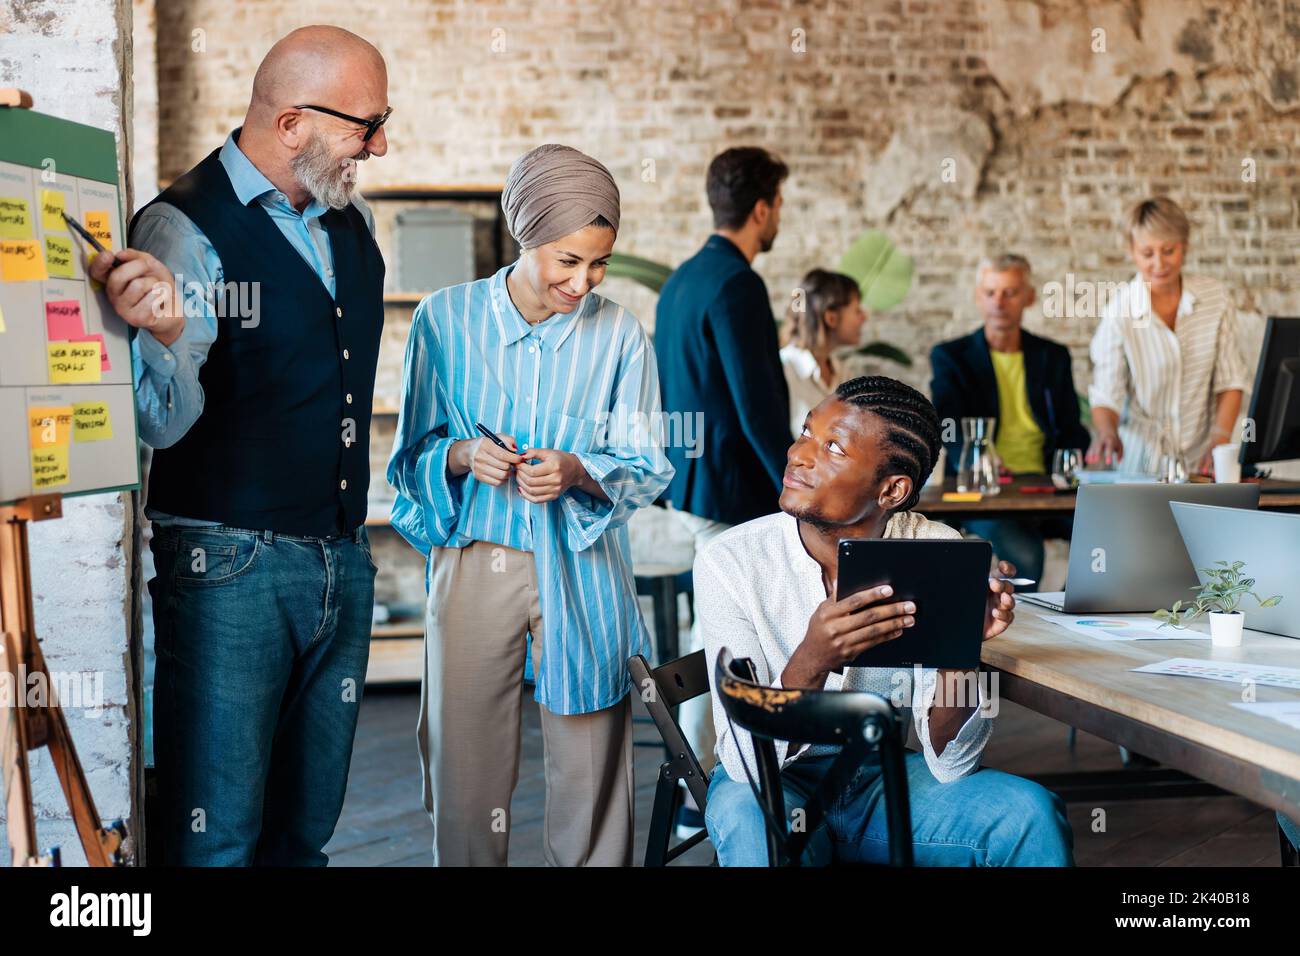 Multi-Ethnic office workspace room - Businesspeople meeting gather around the business model canvas - Diverse team of creative professionals talk, bra Stock Photo